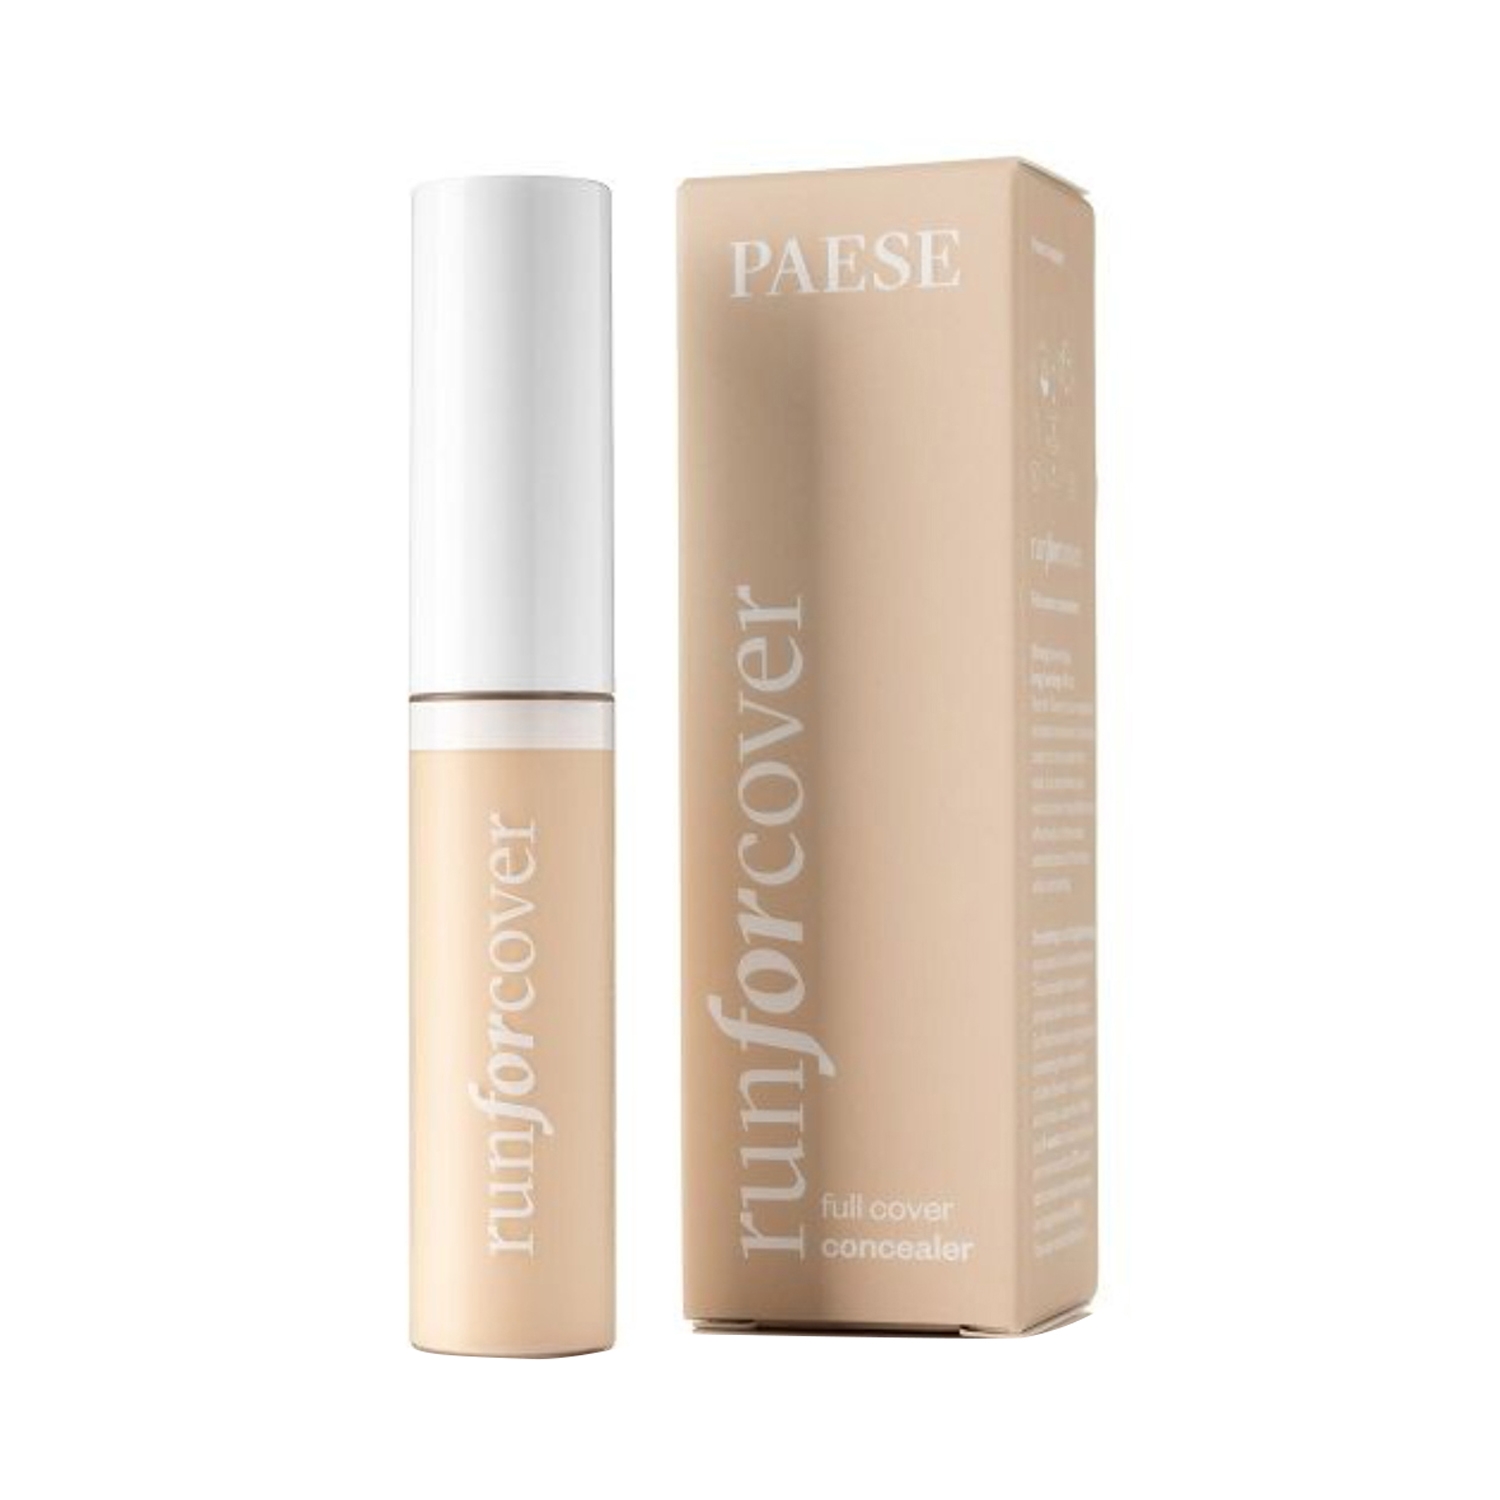 Paese Cosmetics | Paese Cosmetics Run For Cover Full Cover Concealer - 40 Golden Beige (9ml)